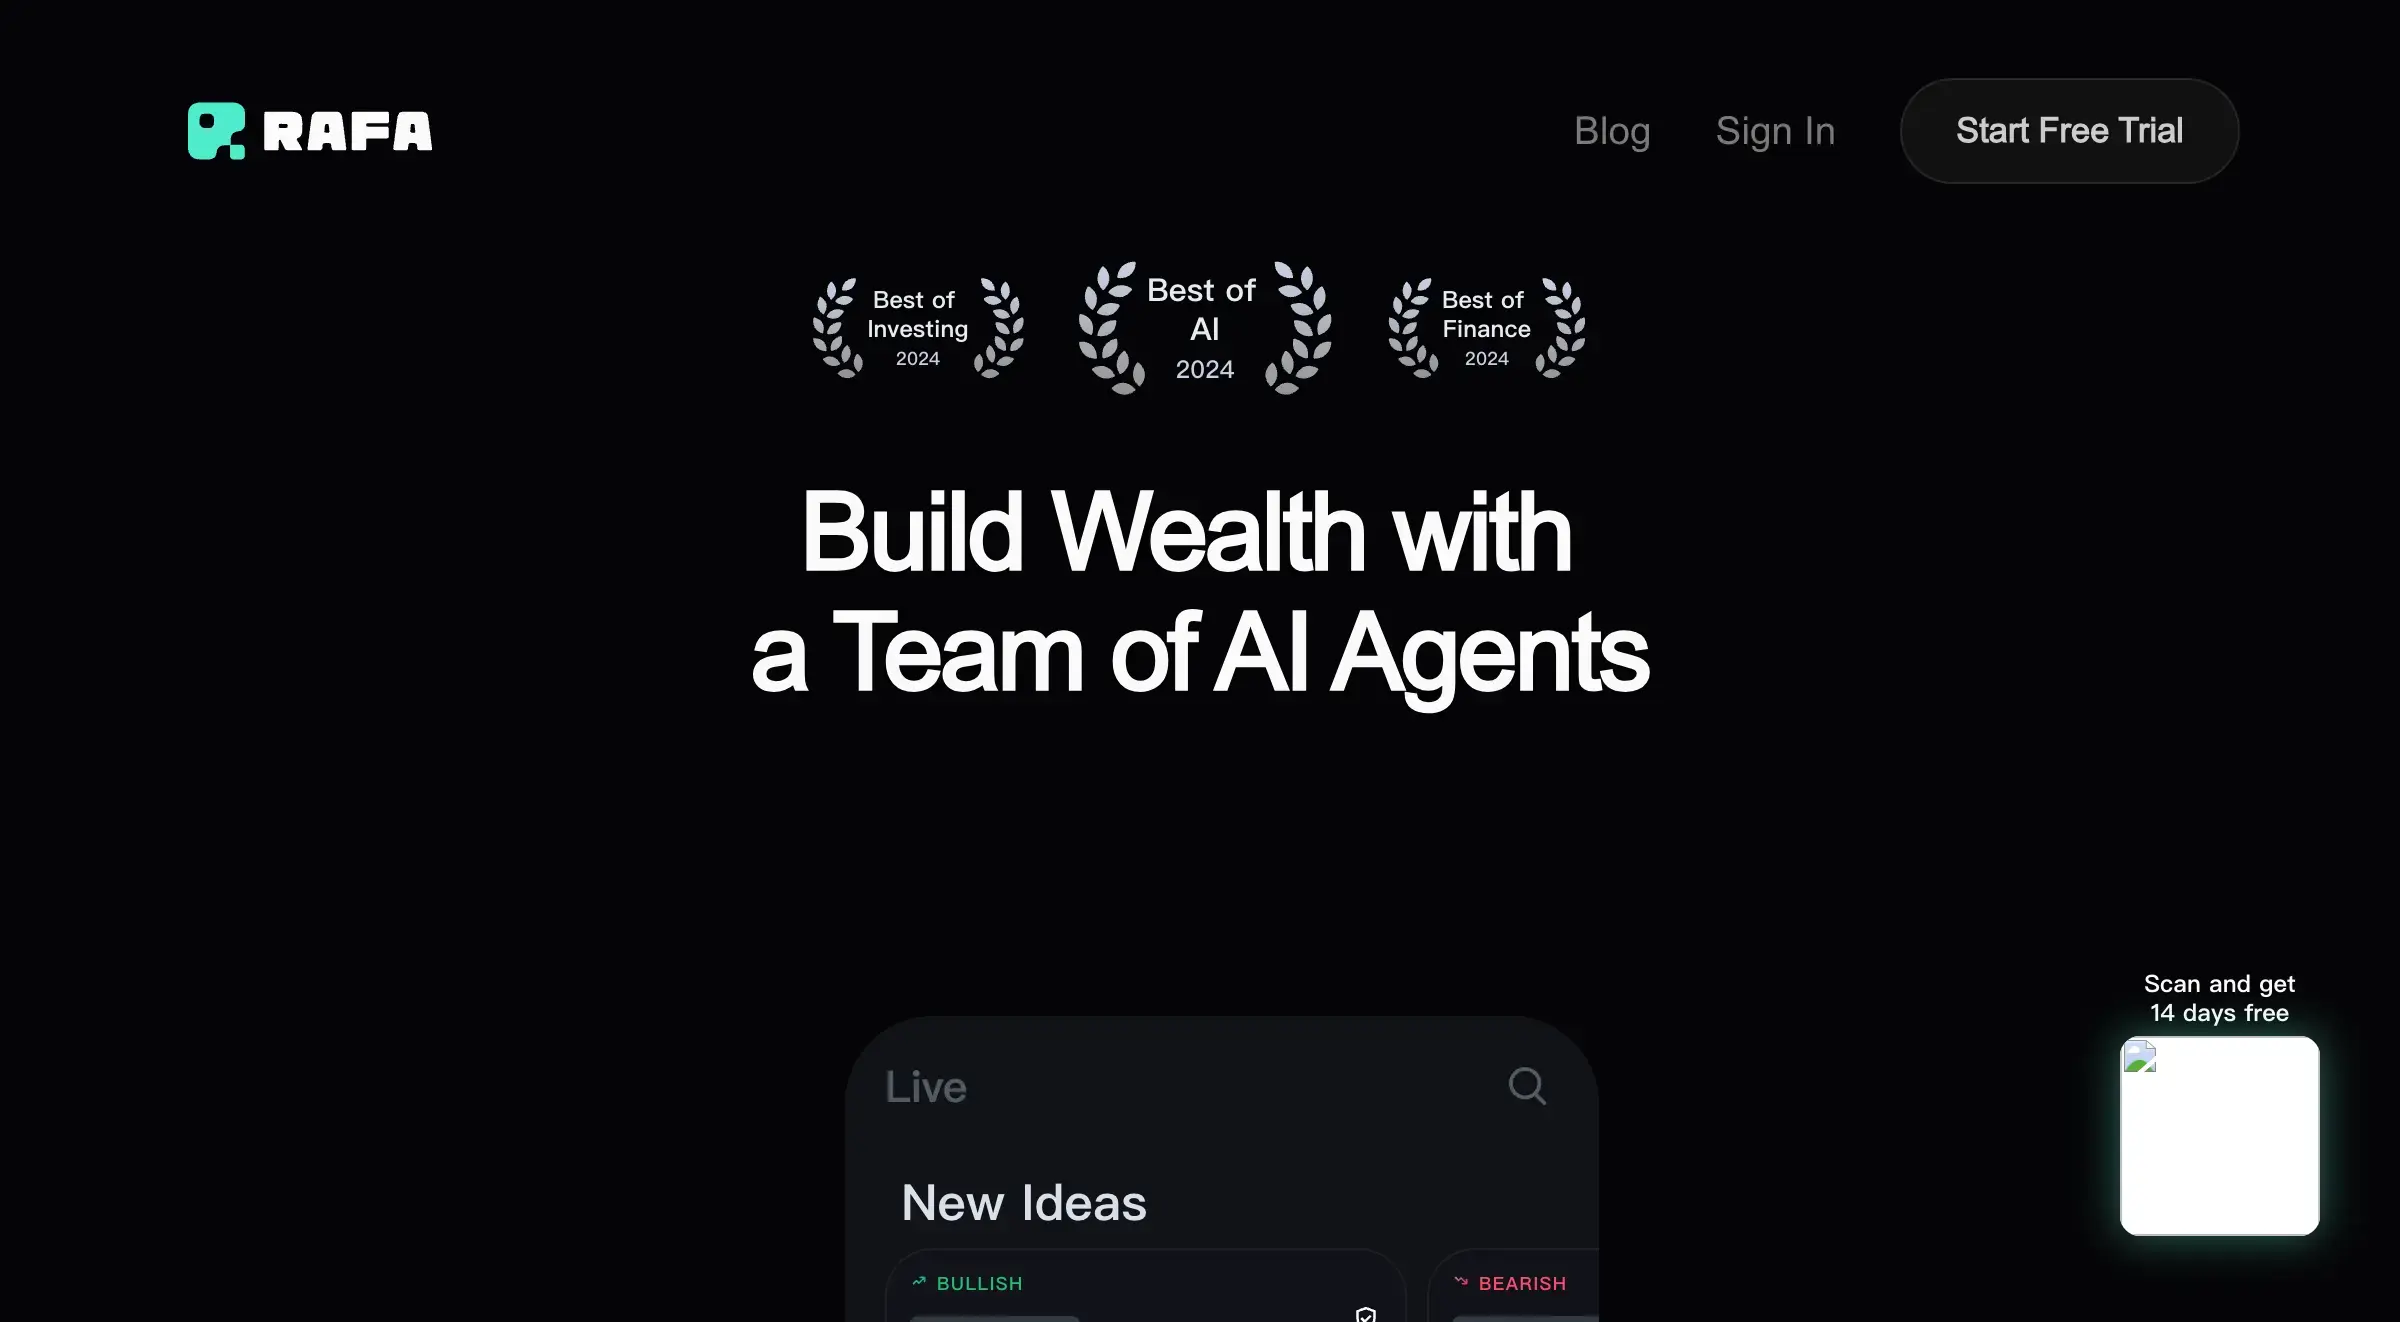 RAFA - Build Wealth with the Power of AI